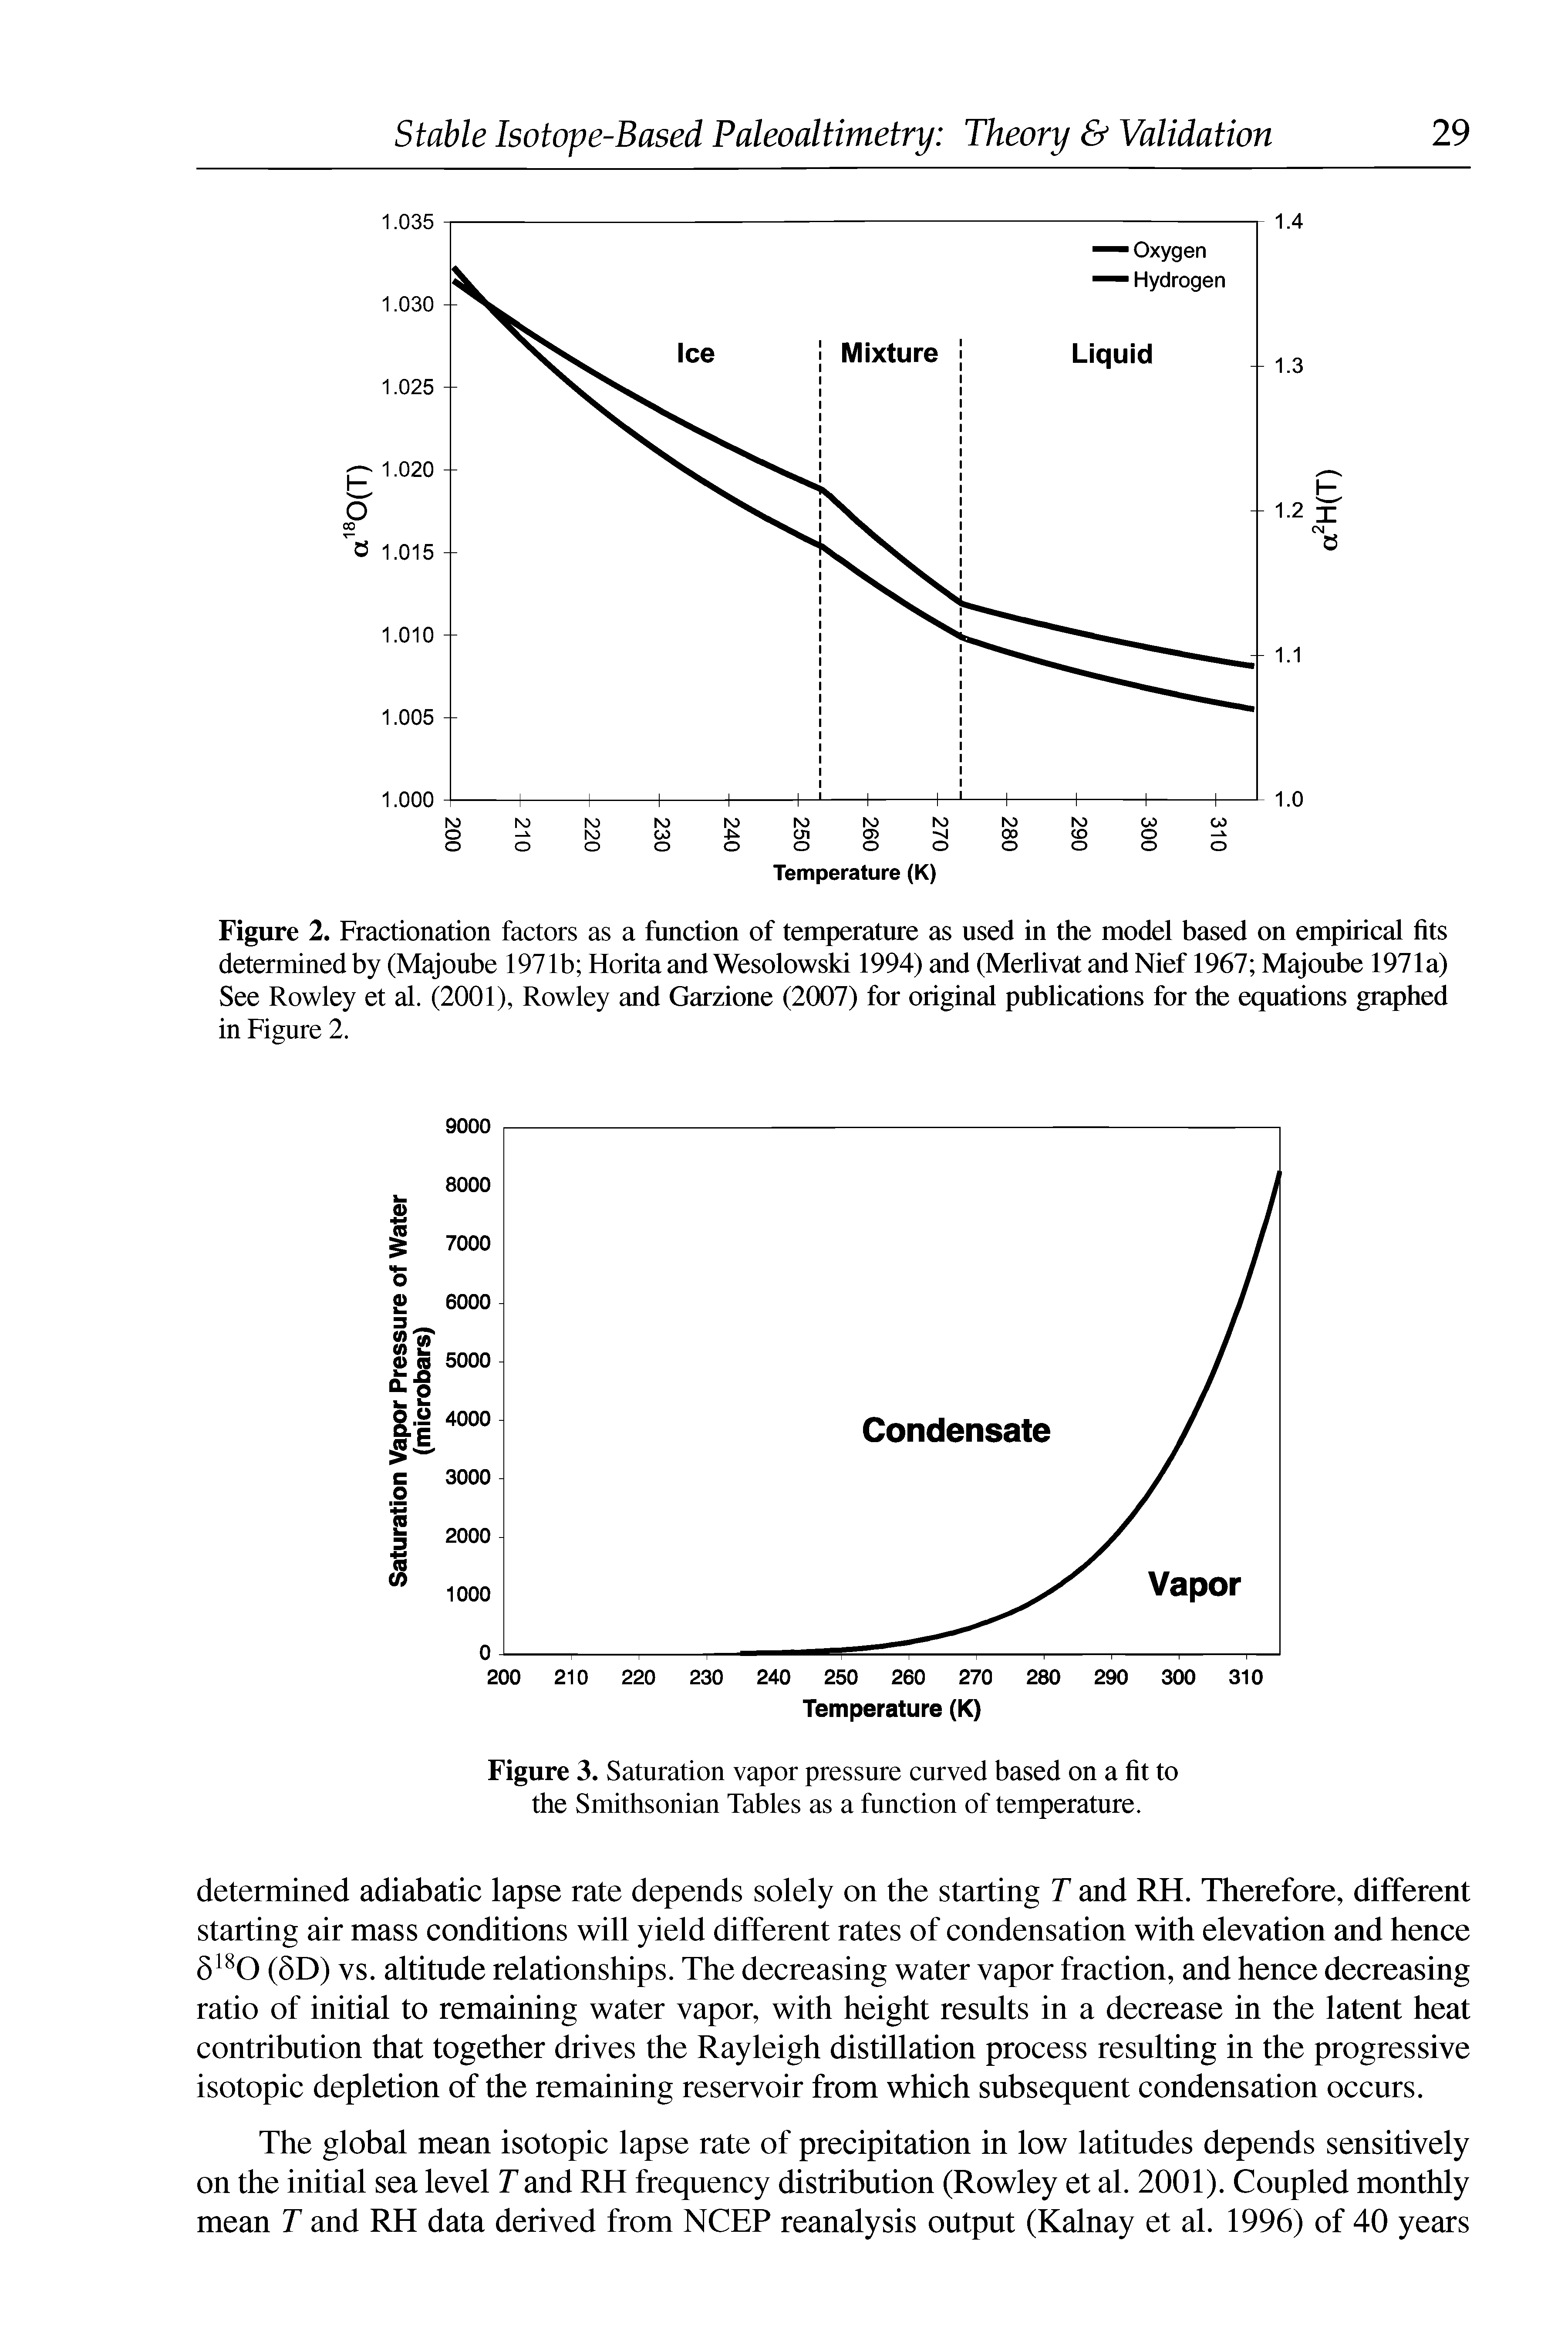 Figure 2. Fractionation factors as a function of temperature as used in the model based on empirical fits determined by (Majoube 1971b Horita and Wesolowski 1994) and (Merlivat and Nief 1967 Majoube 1971a) See Rowley et al. (2001), Rowley and Garzione (2007) for original publications for the equations graphed in Figure 2.